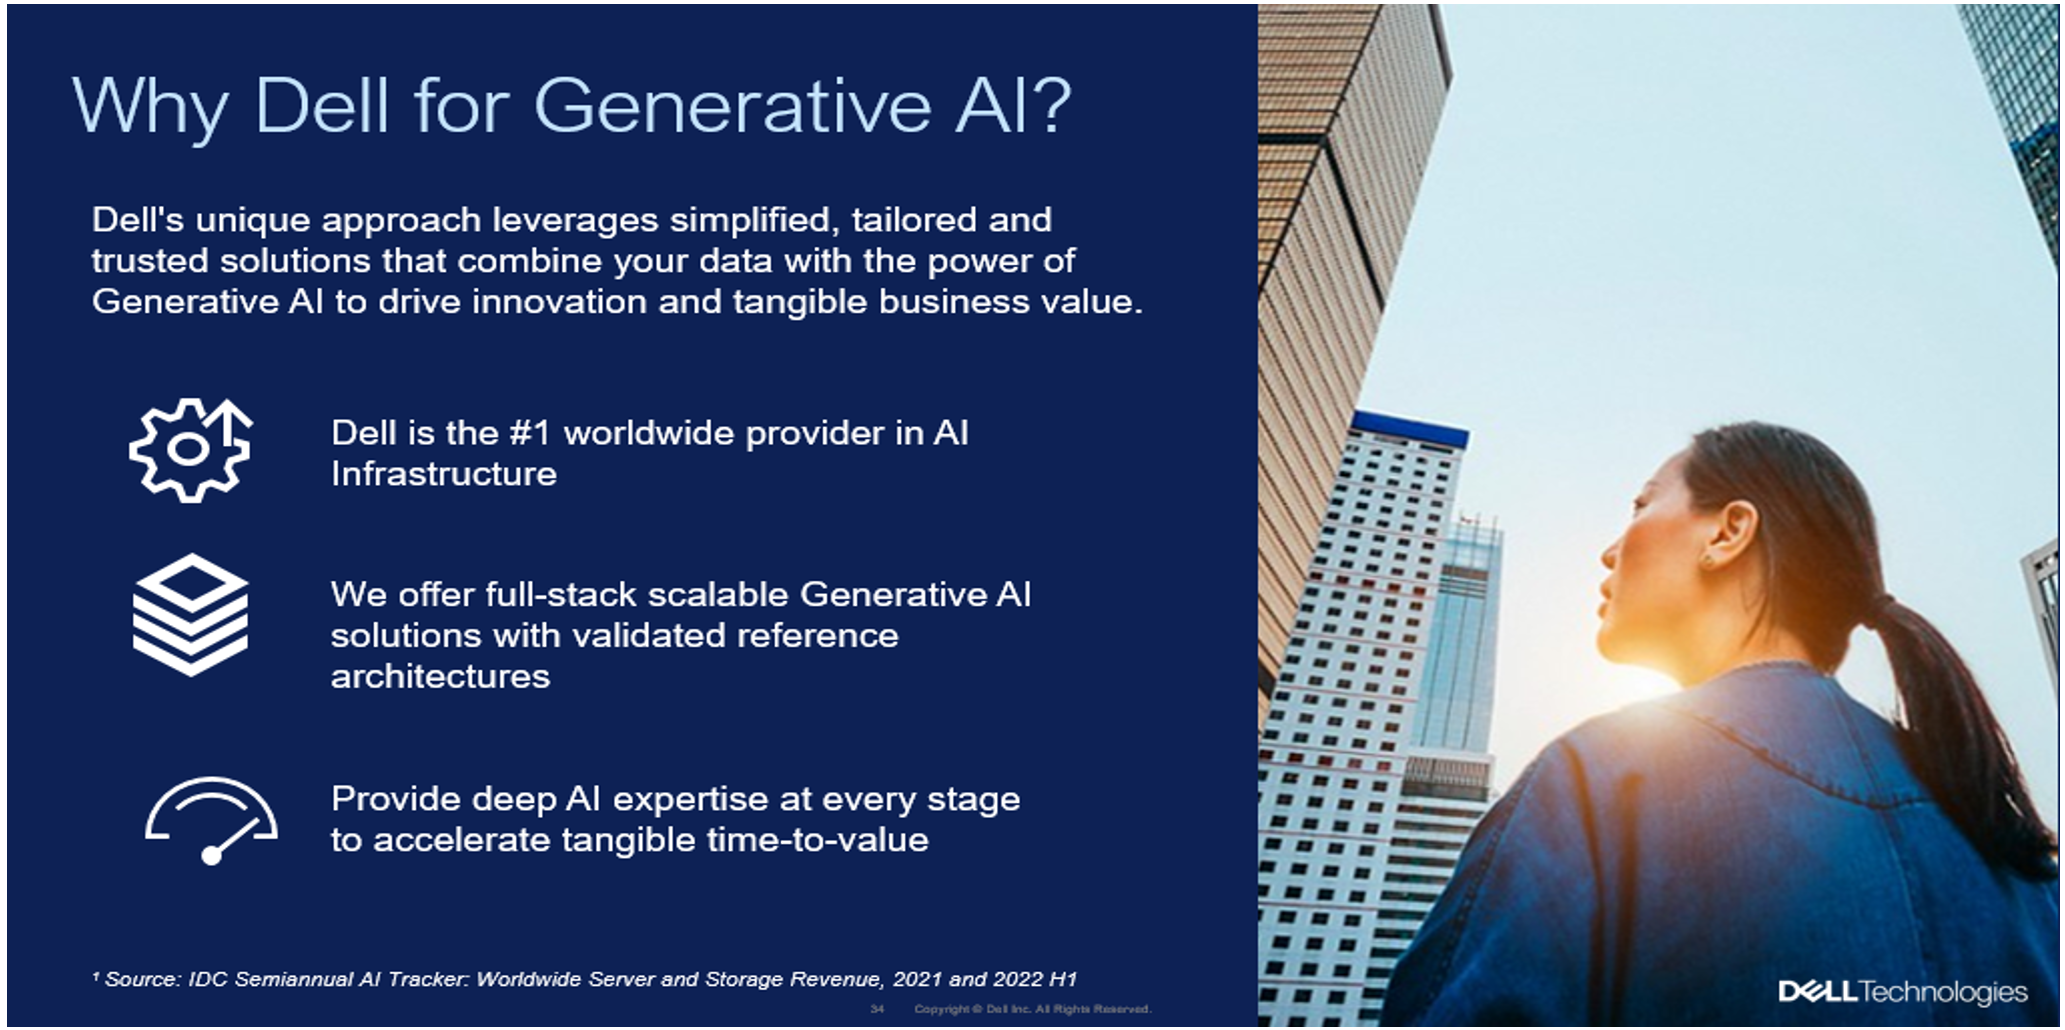 This graphic describes reasons why Dell should be used for Generative AI